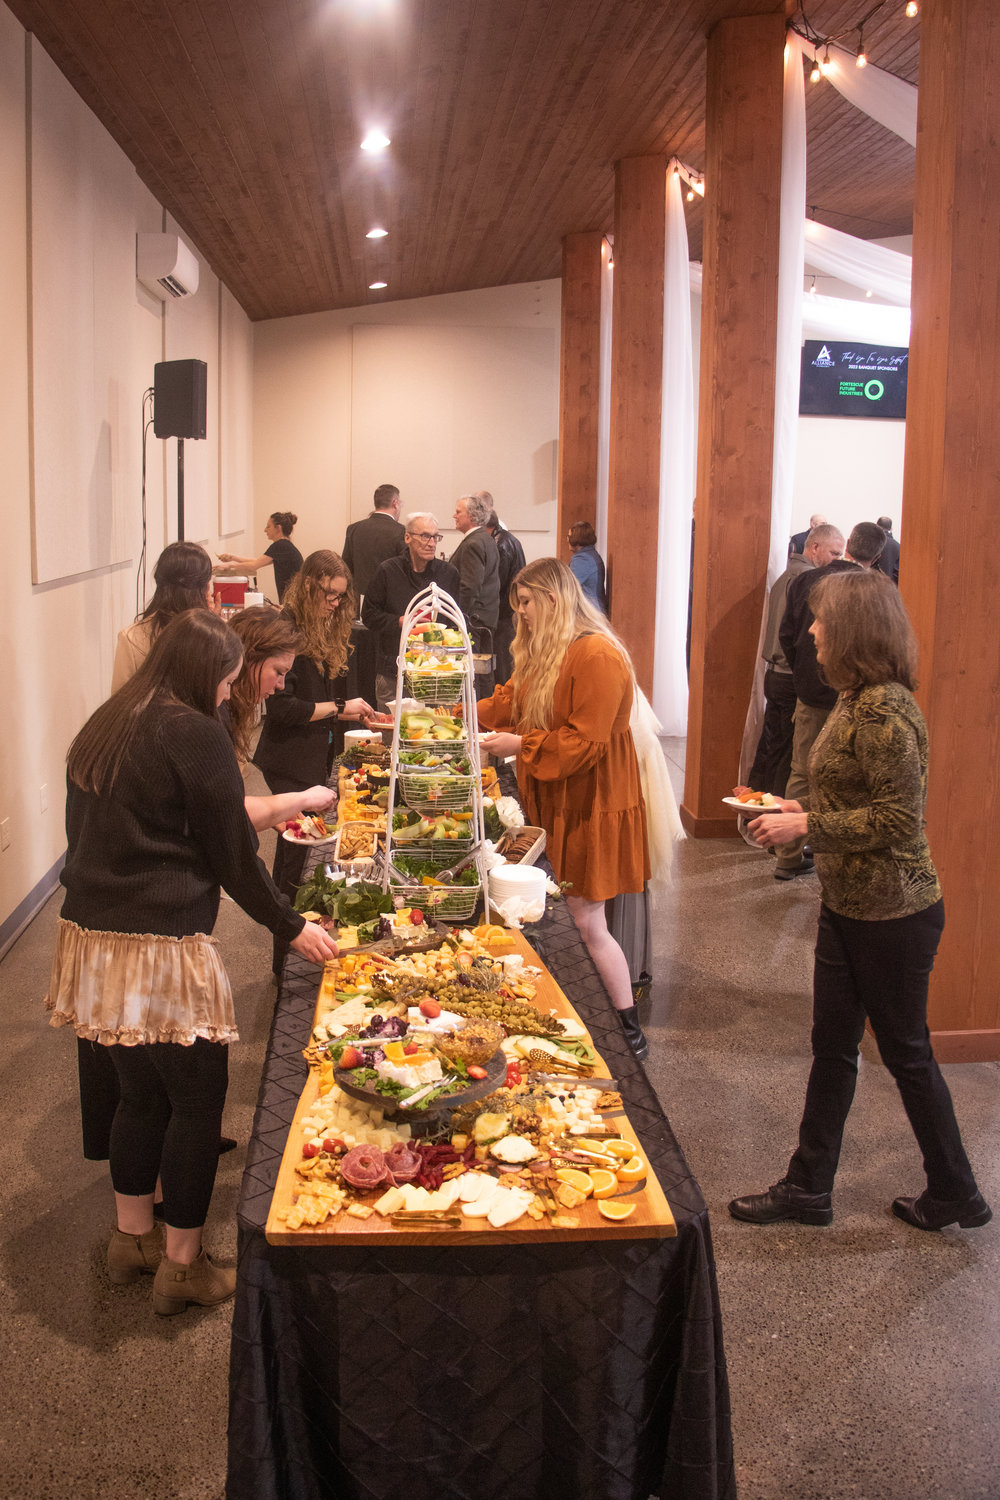 Banquet attendees grab themselves appetizers from the hors d'oeuvre table at the Economic Alliance of Lewis County's 40th annual banquet this past Friday at Jesters Auto Museum & Event Center in Chehalis.